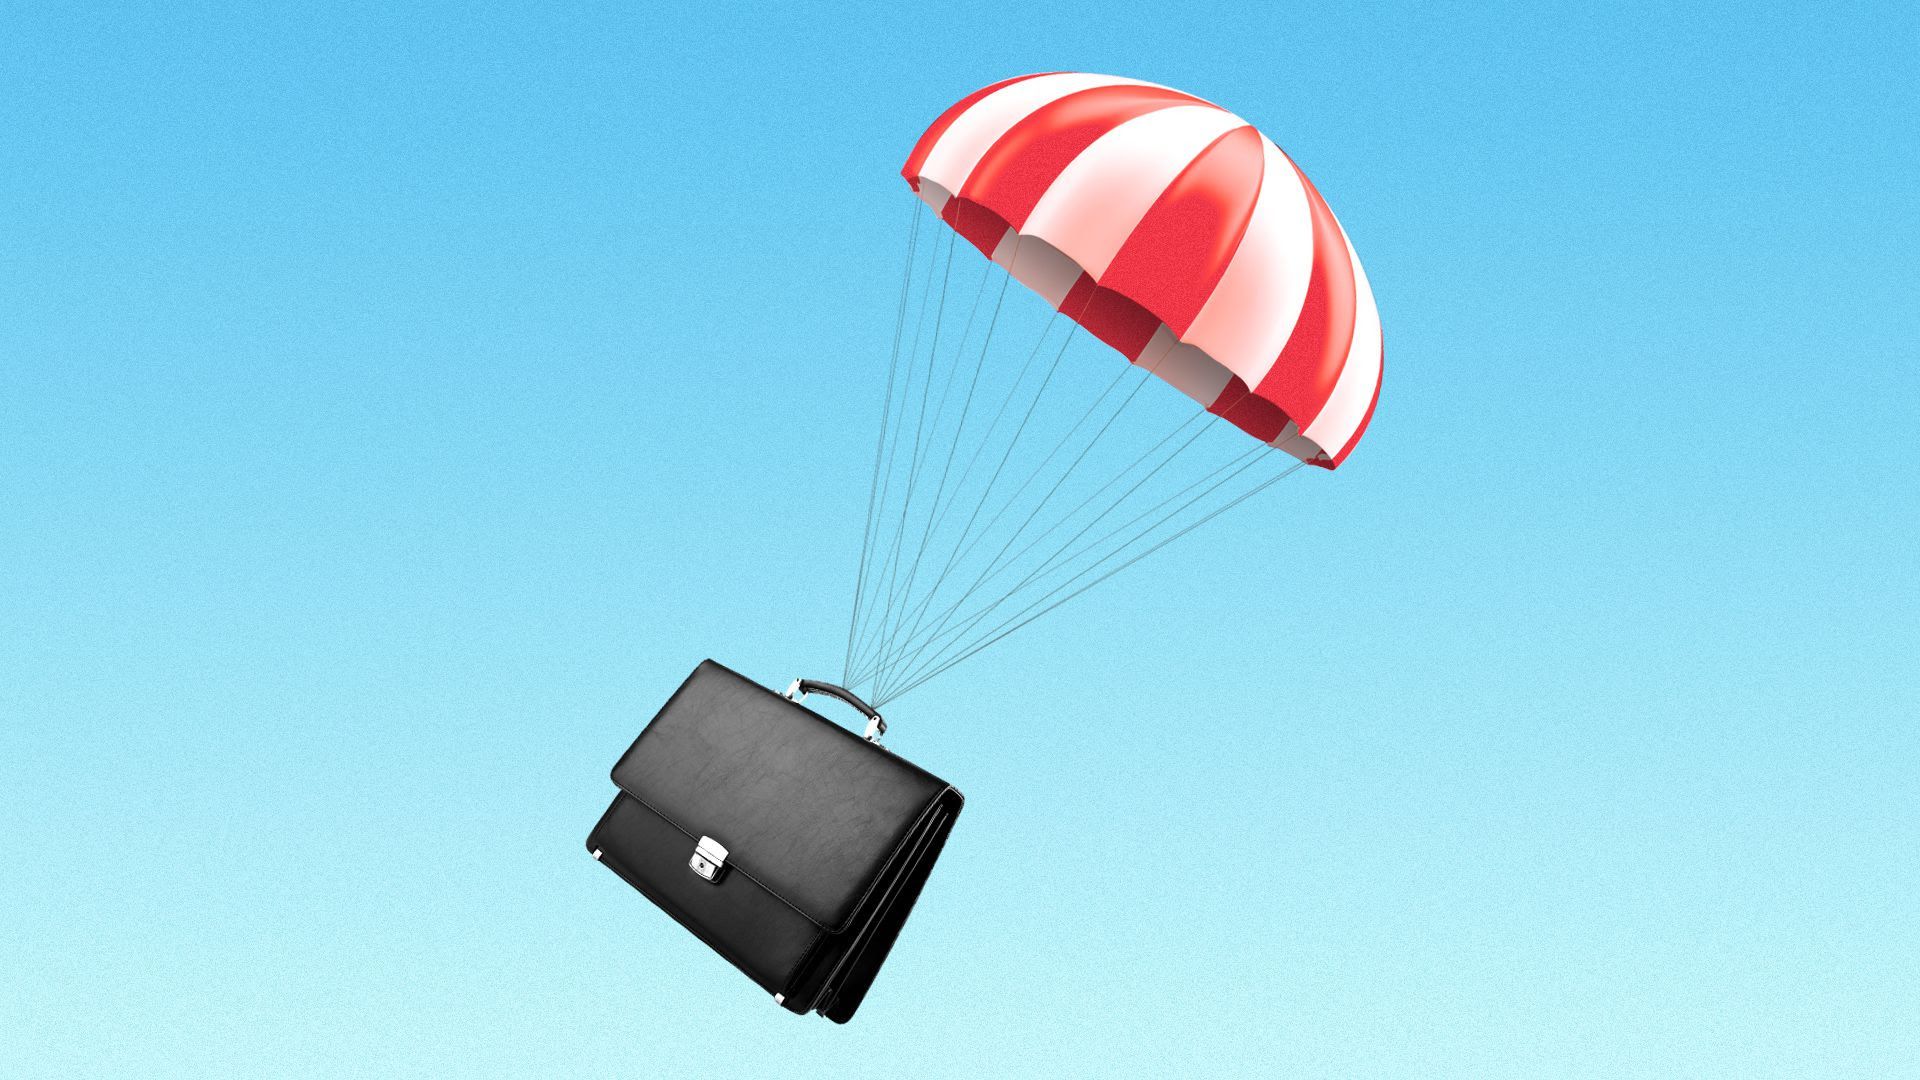 Illustration of a suitcase floating down with a parachute